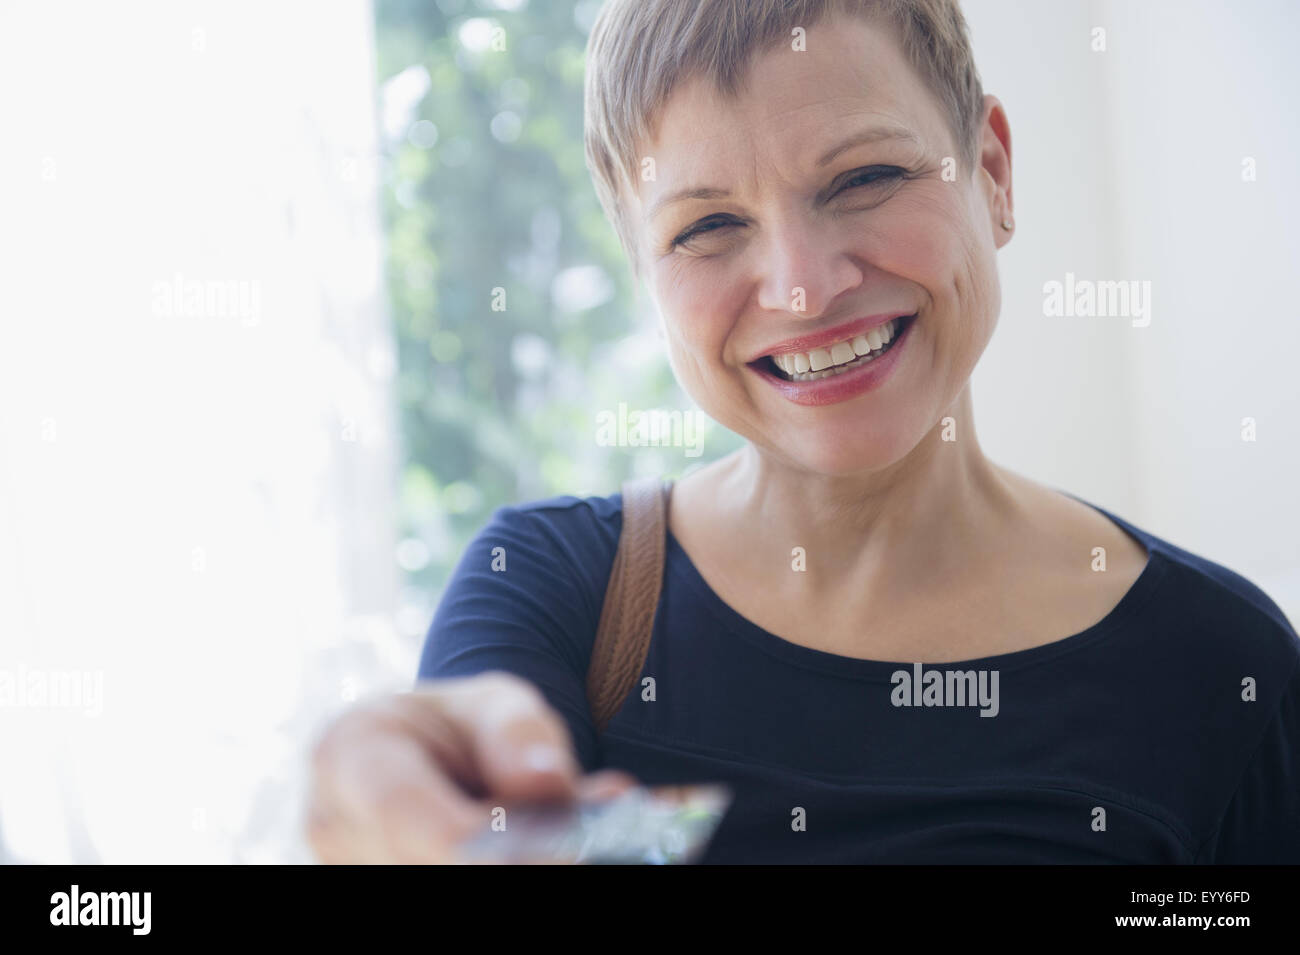 Caucasian woman paying with credit card Stock Photo